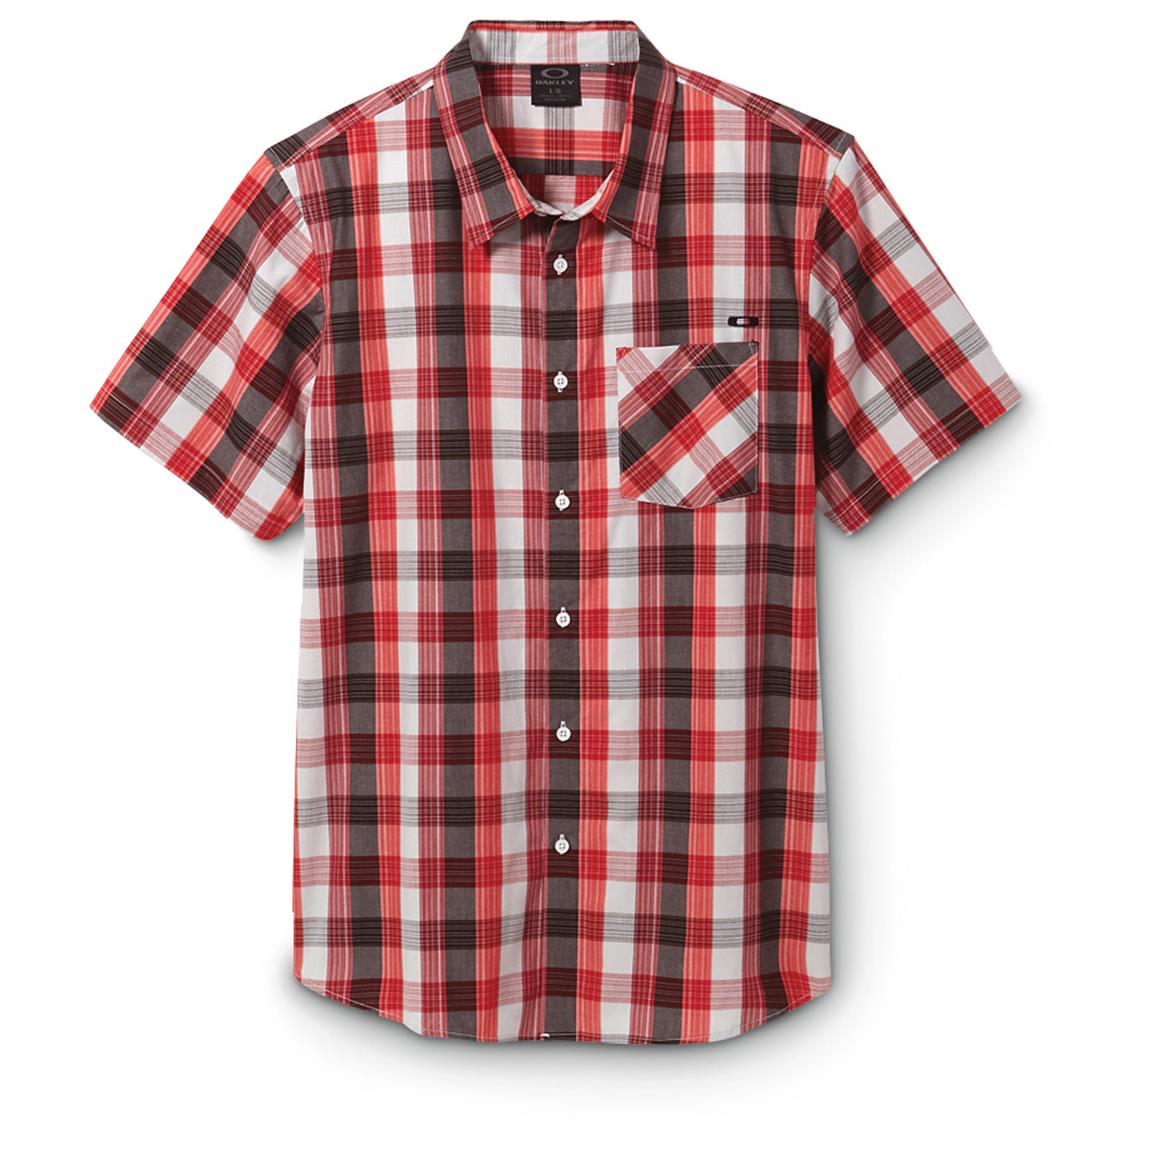 Oakley Classic Woven Shirt - 579866, Shirts at Sportsman's Guide